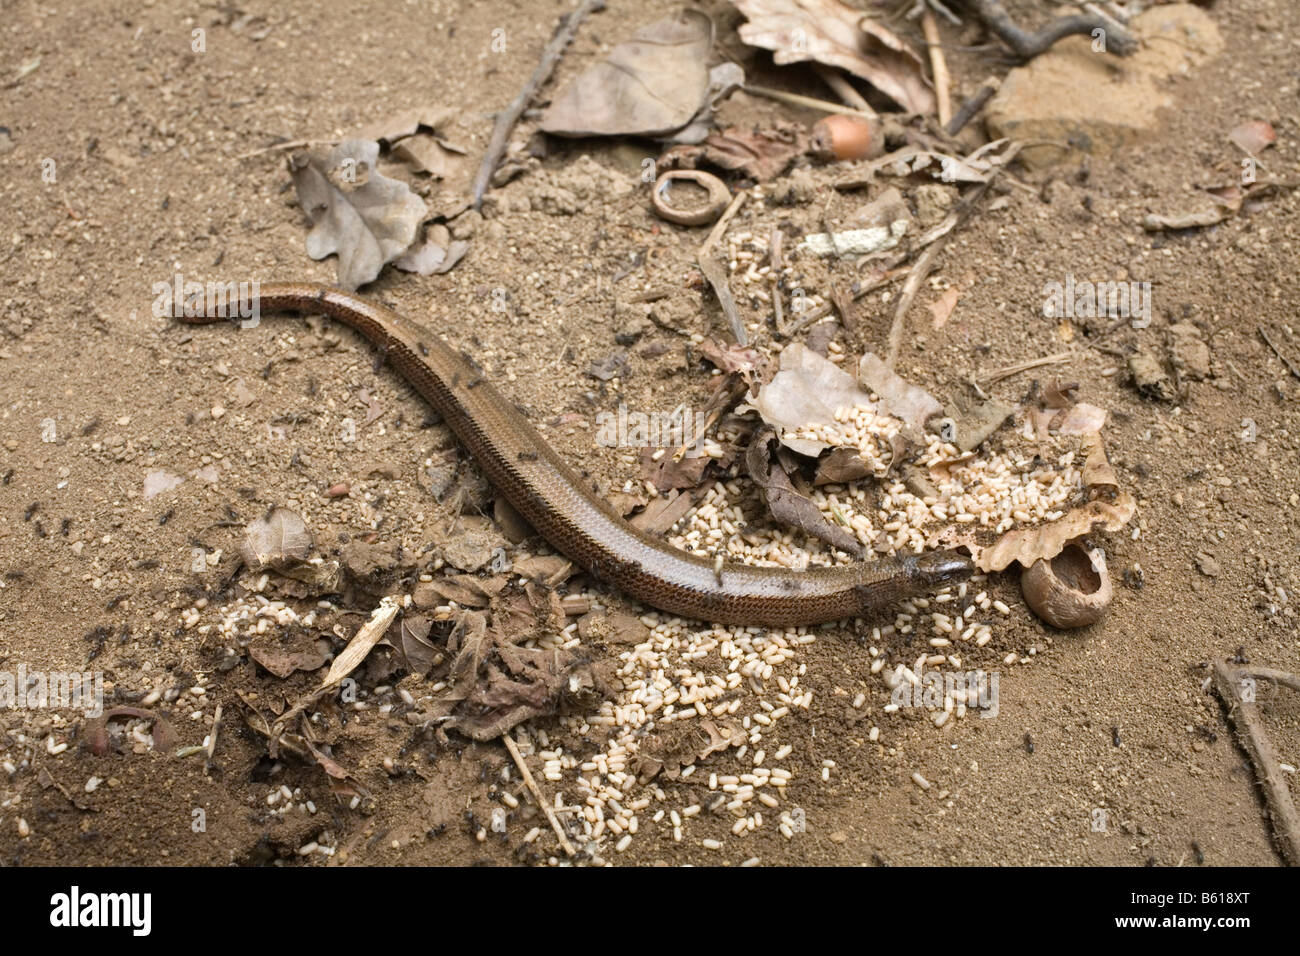 slow worm Anguis fragilis with ants and larvae Stock Photo